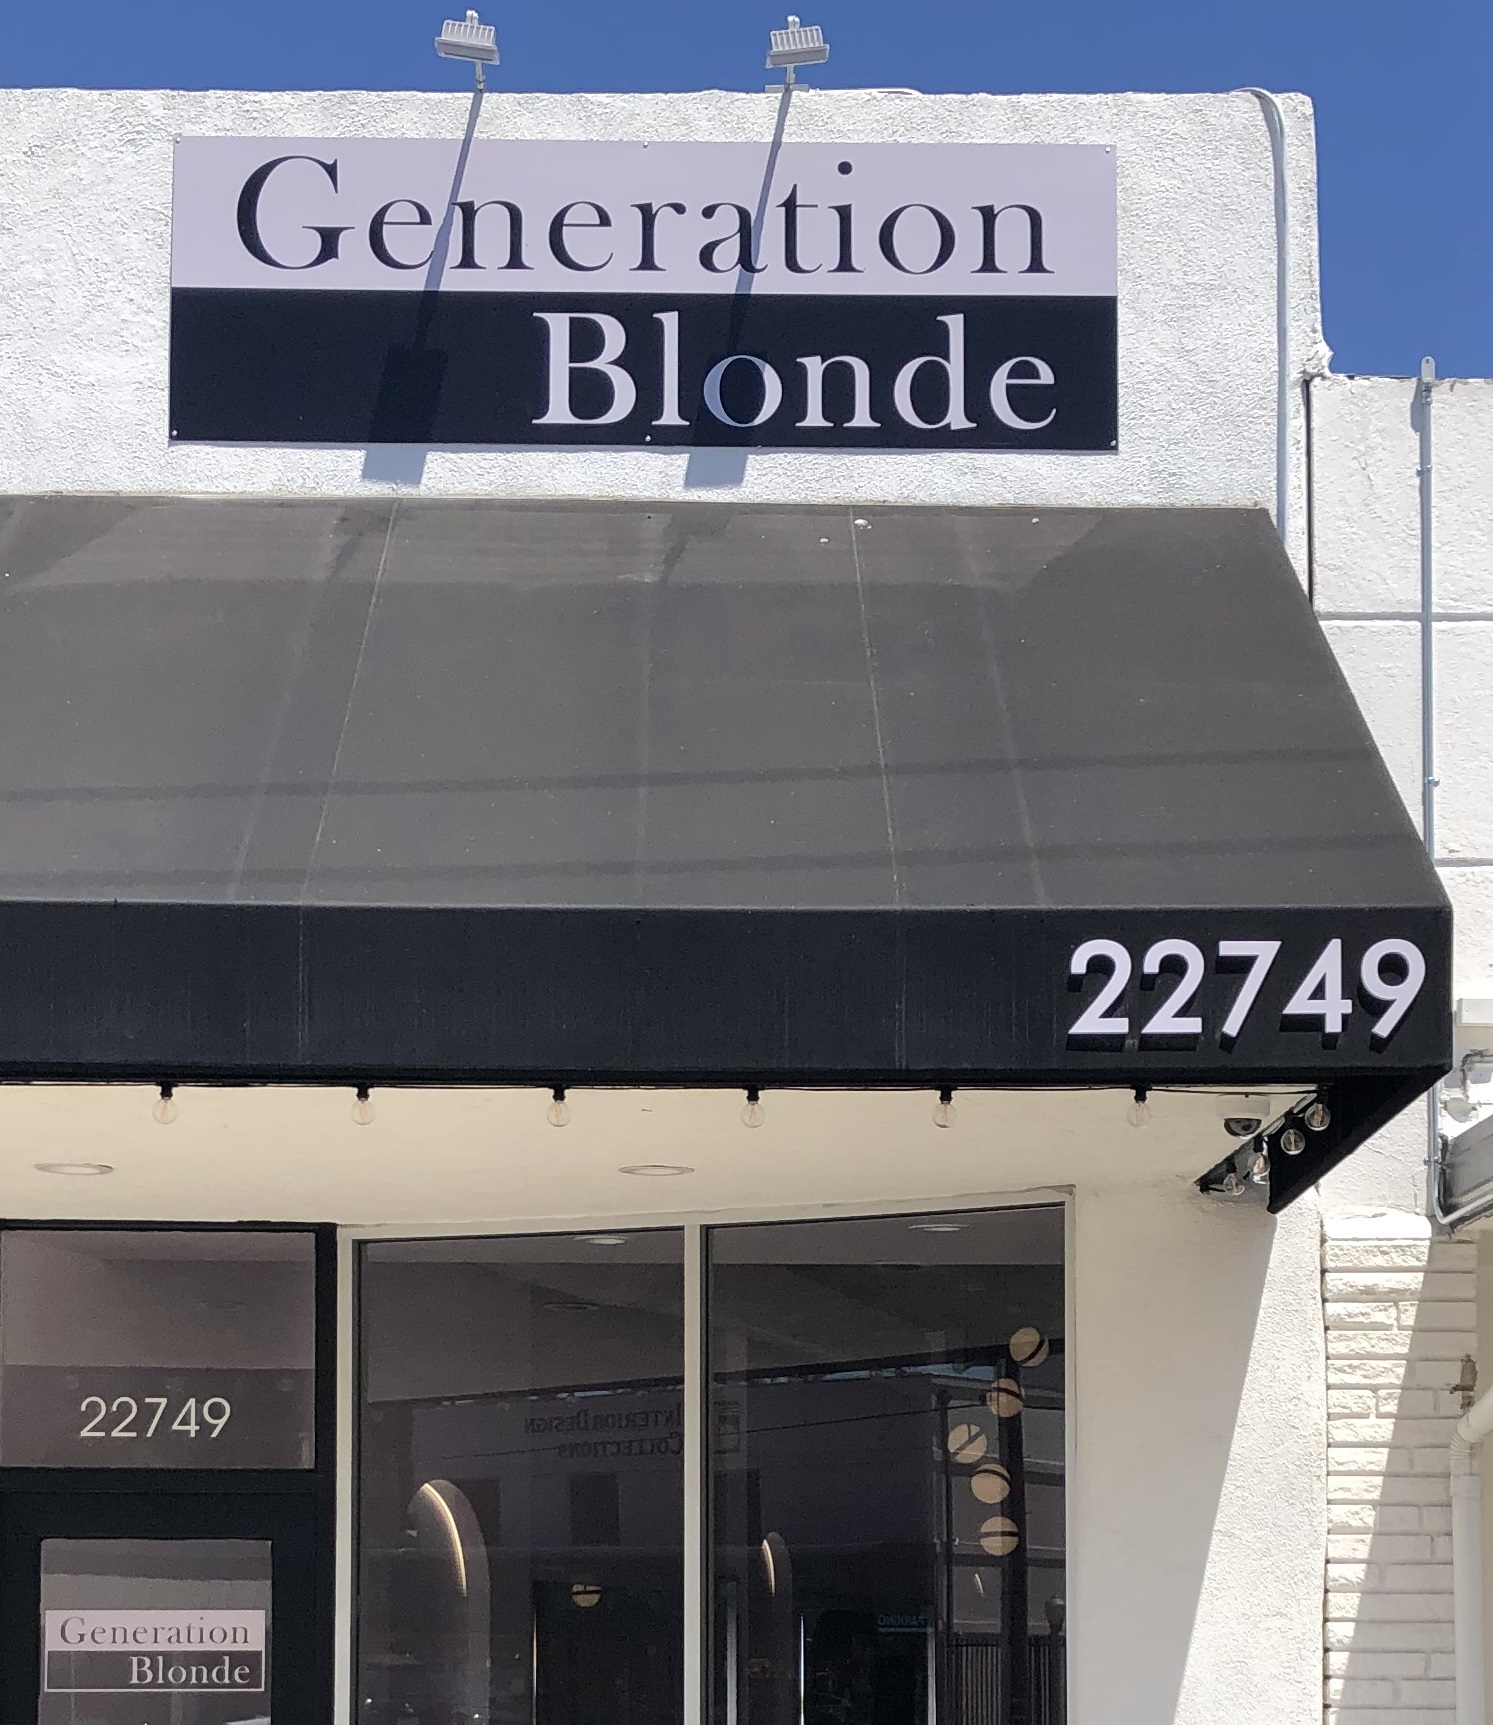 A dimensional lettering address sign is a must have for any business and will certainly make Generation Blonde in Woodland Hills easier to find.